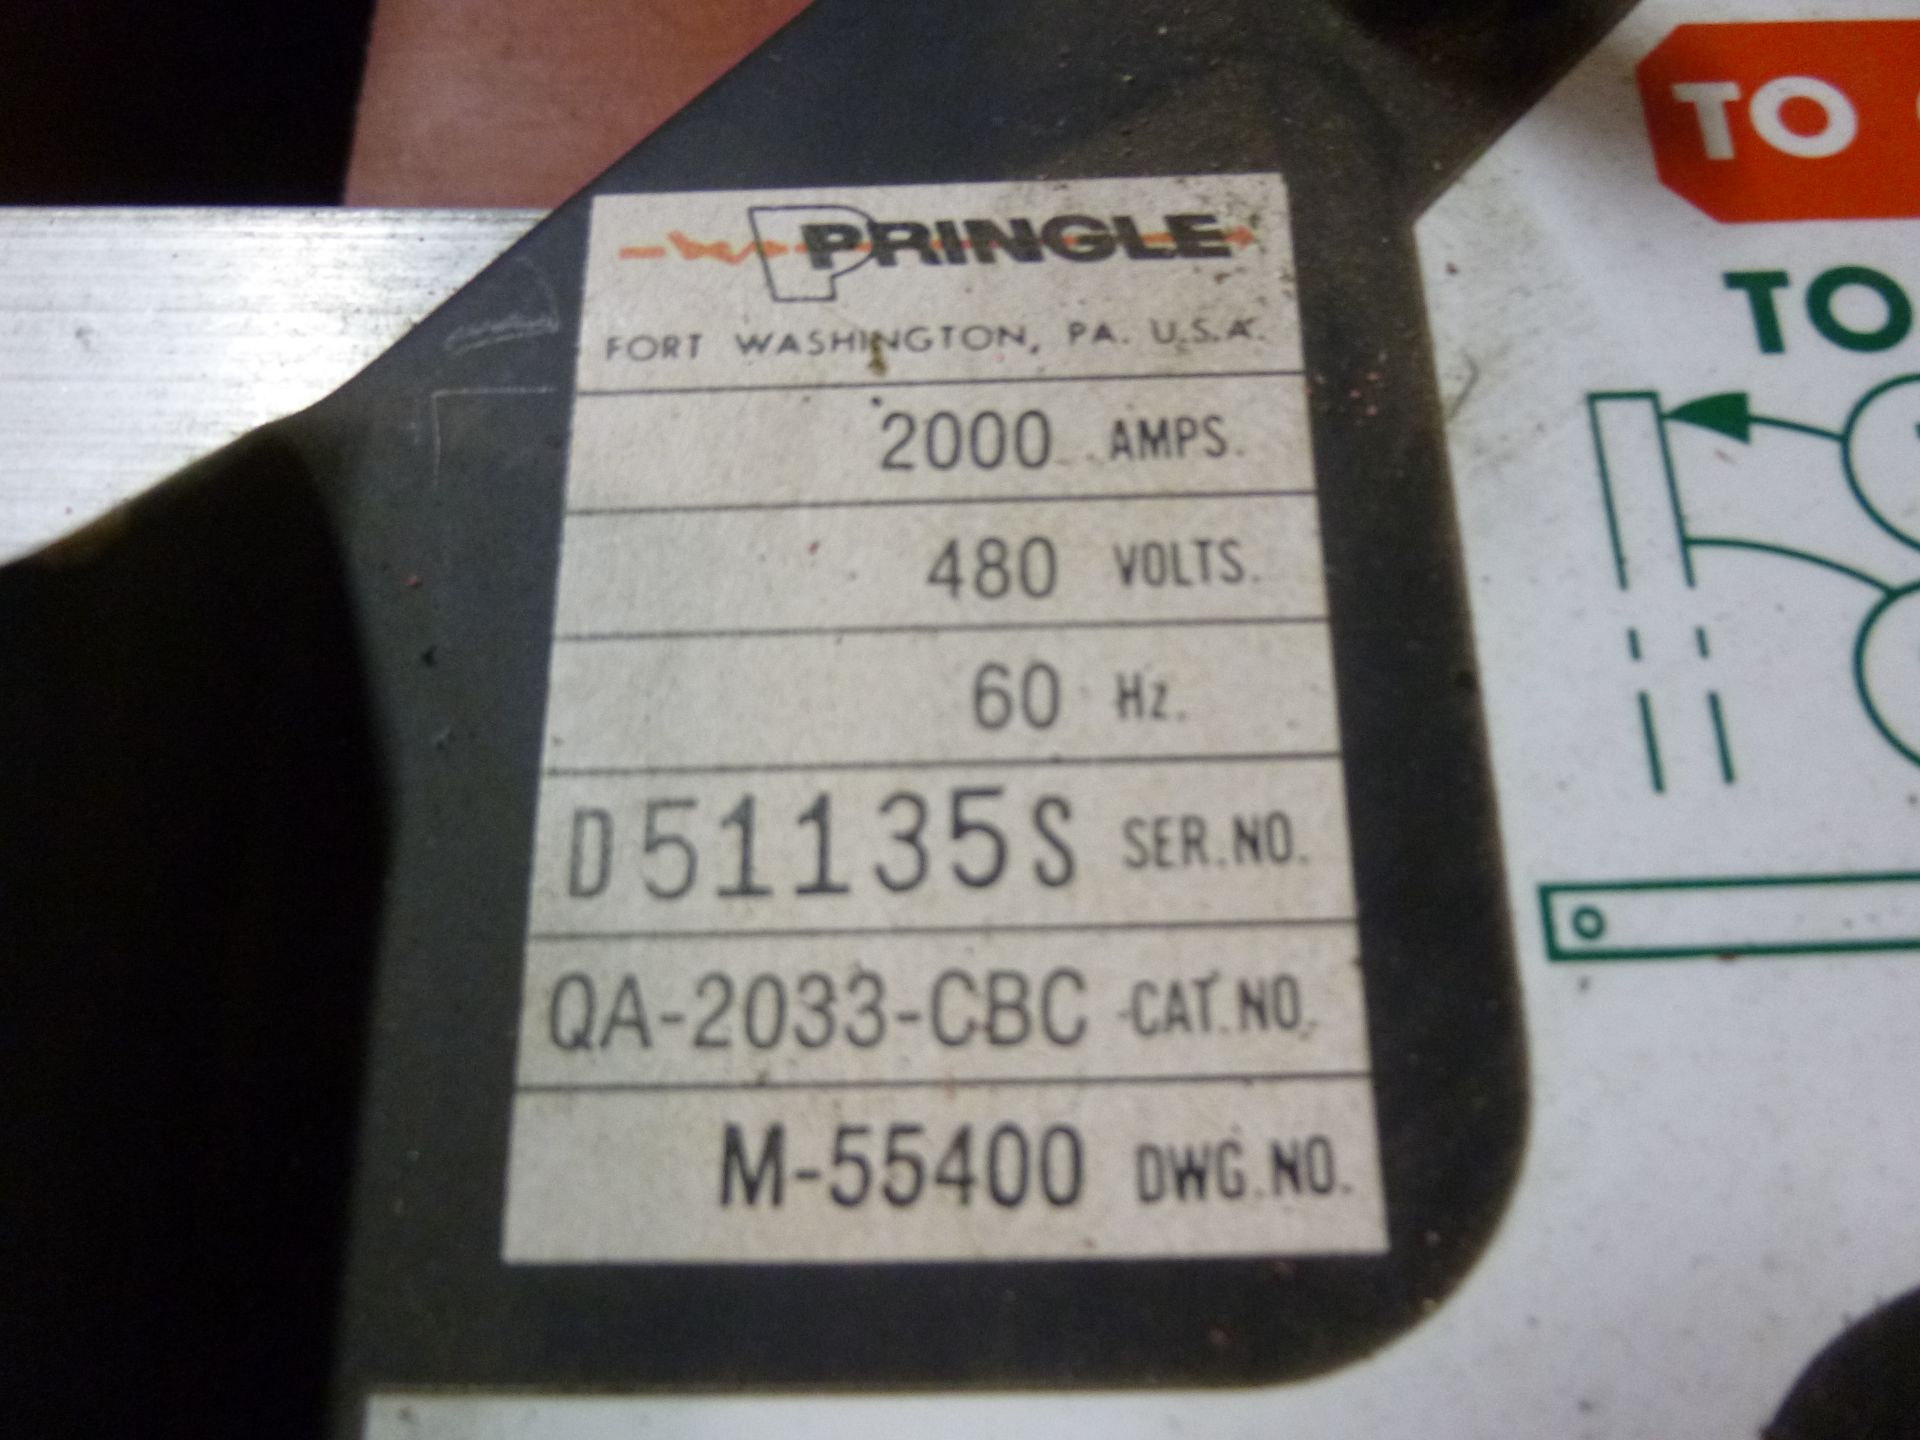 Pringle 2000amp switch, 480v, catalog number QA-2033-CBC, appears new in box - Image 2 of 2